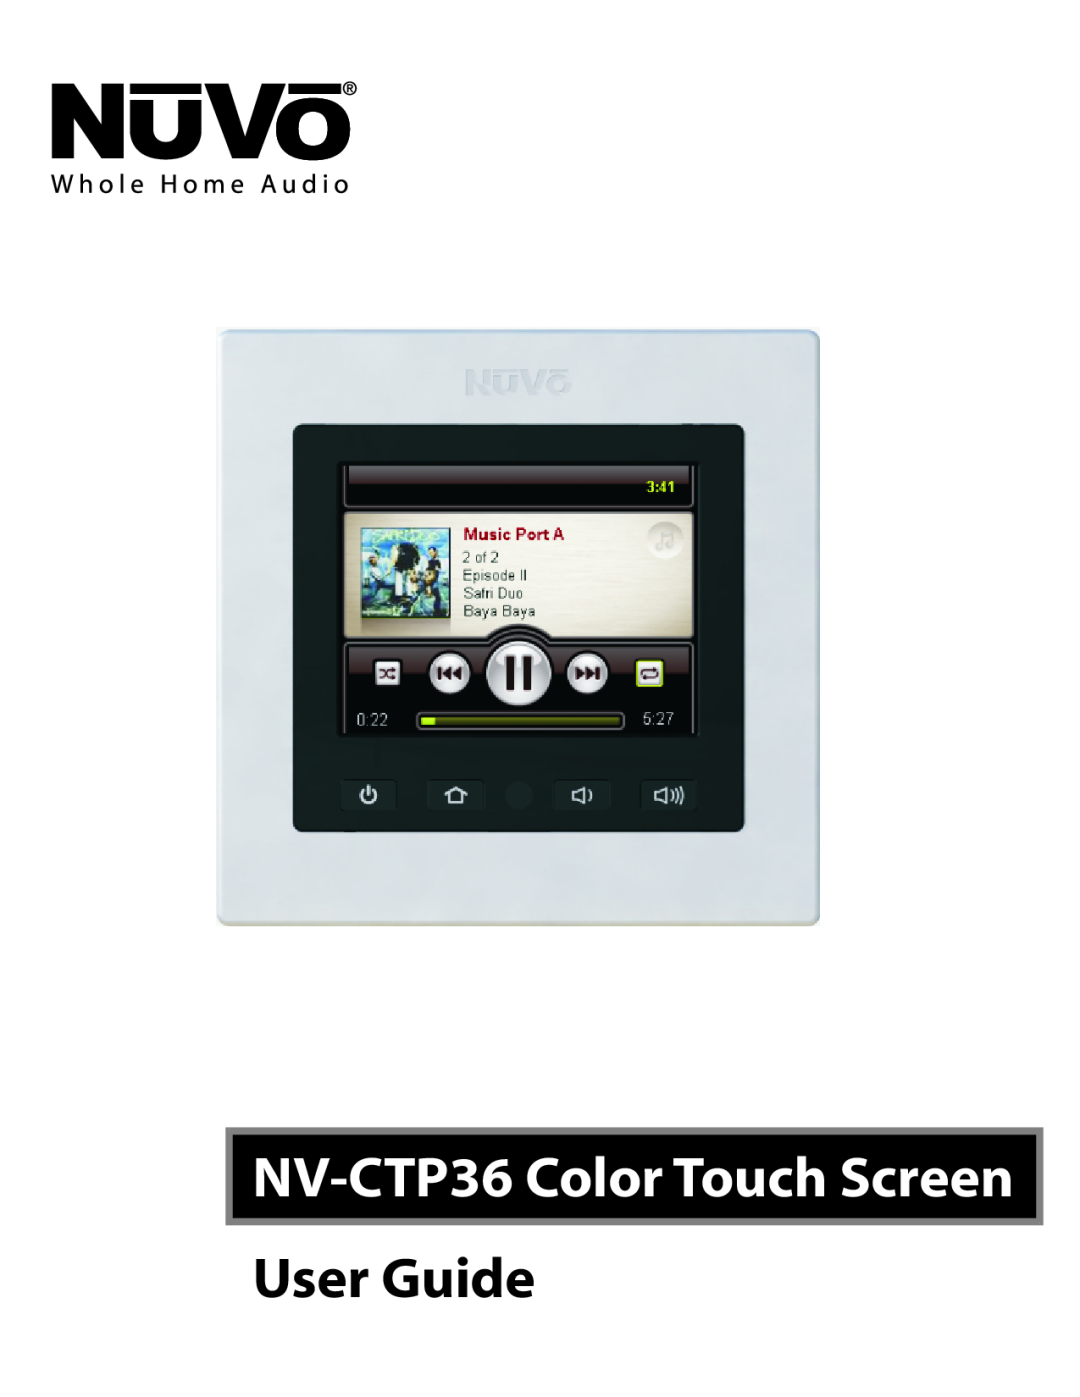 Nuvo manual NV-CTP36Color Touch Screen, User Guide 